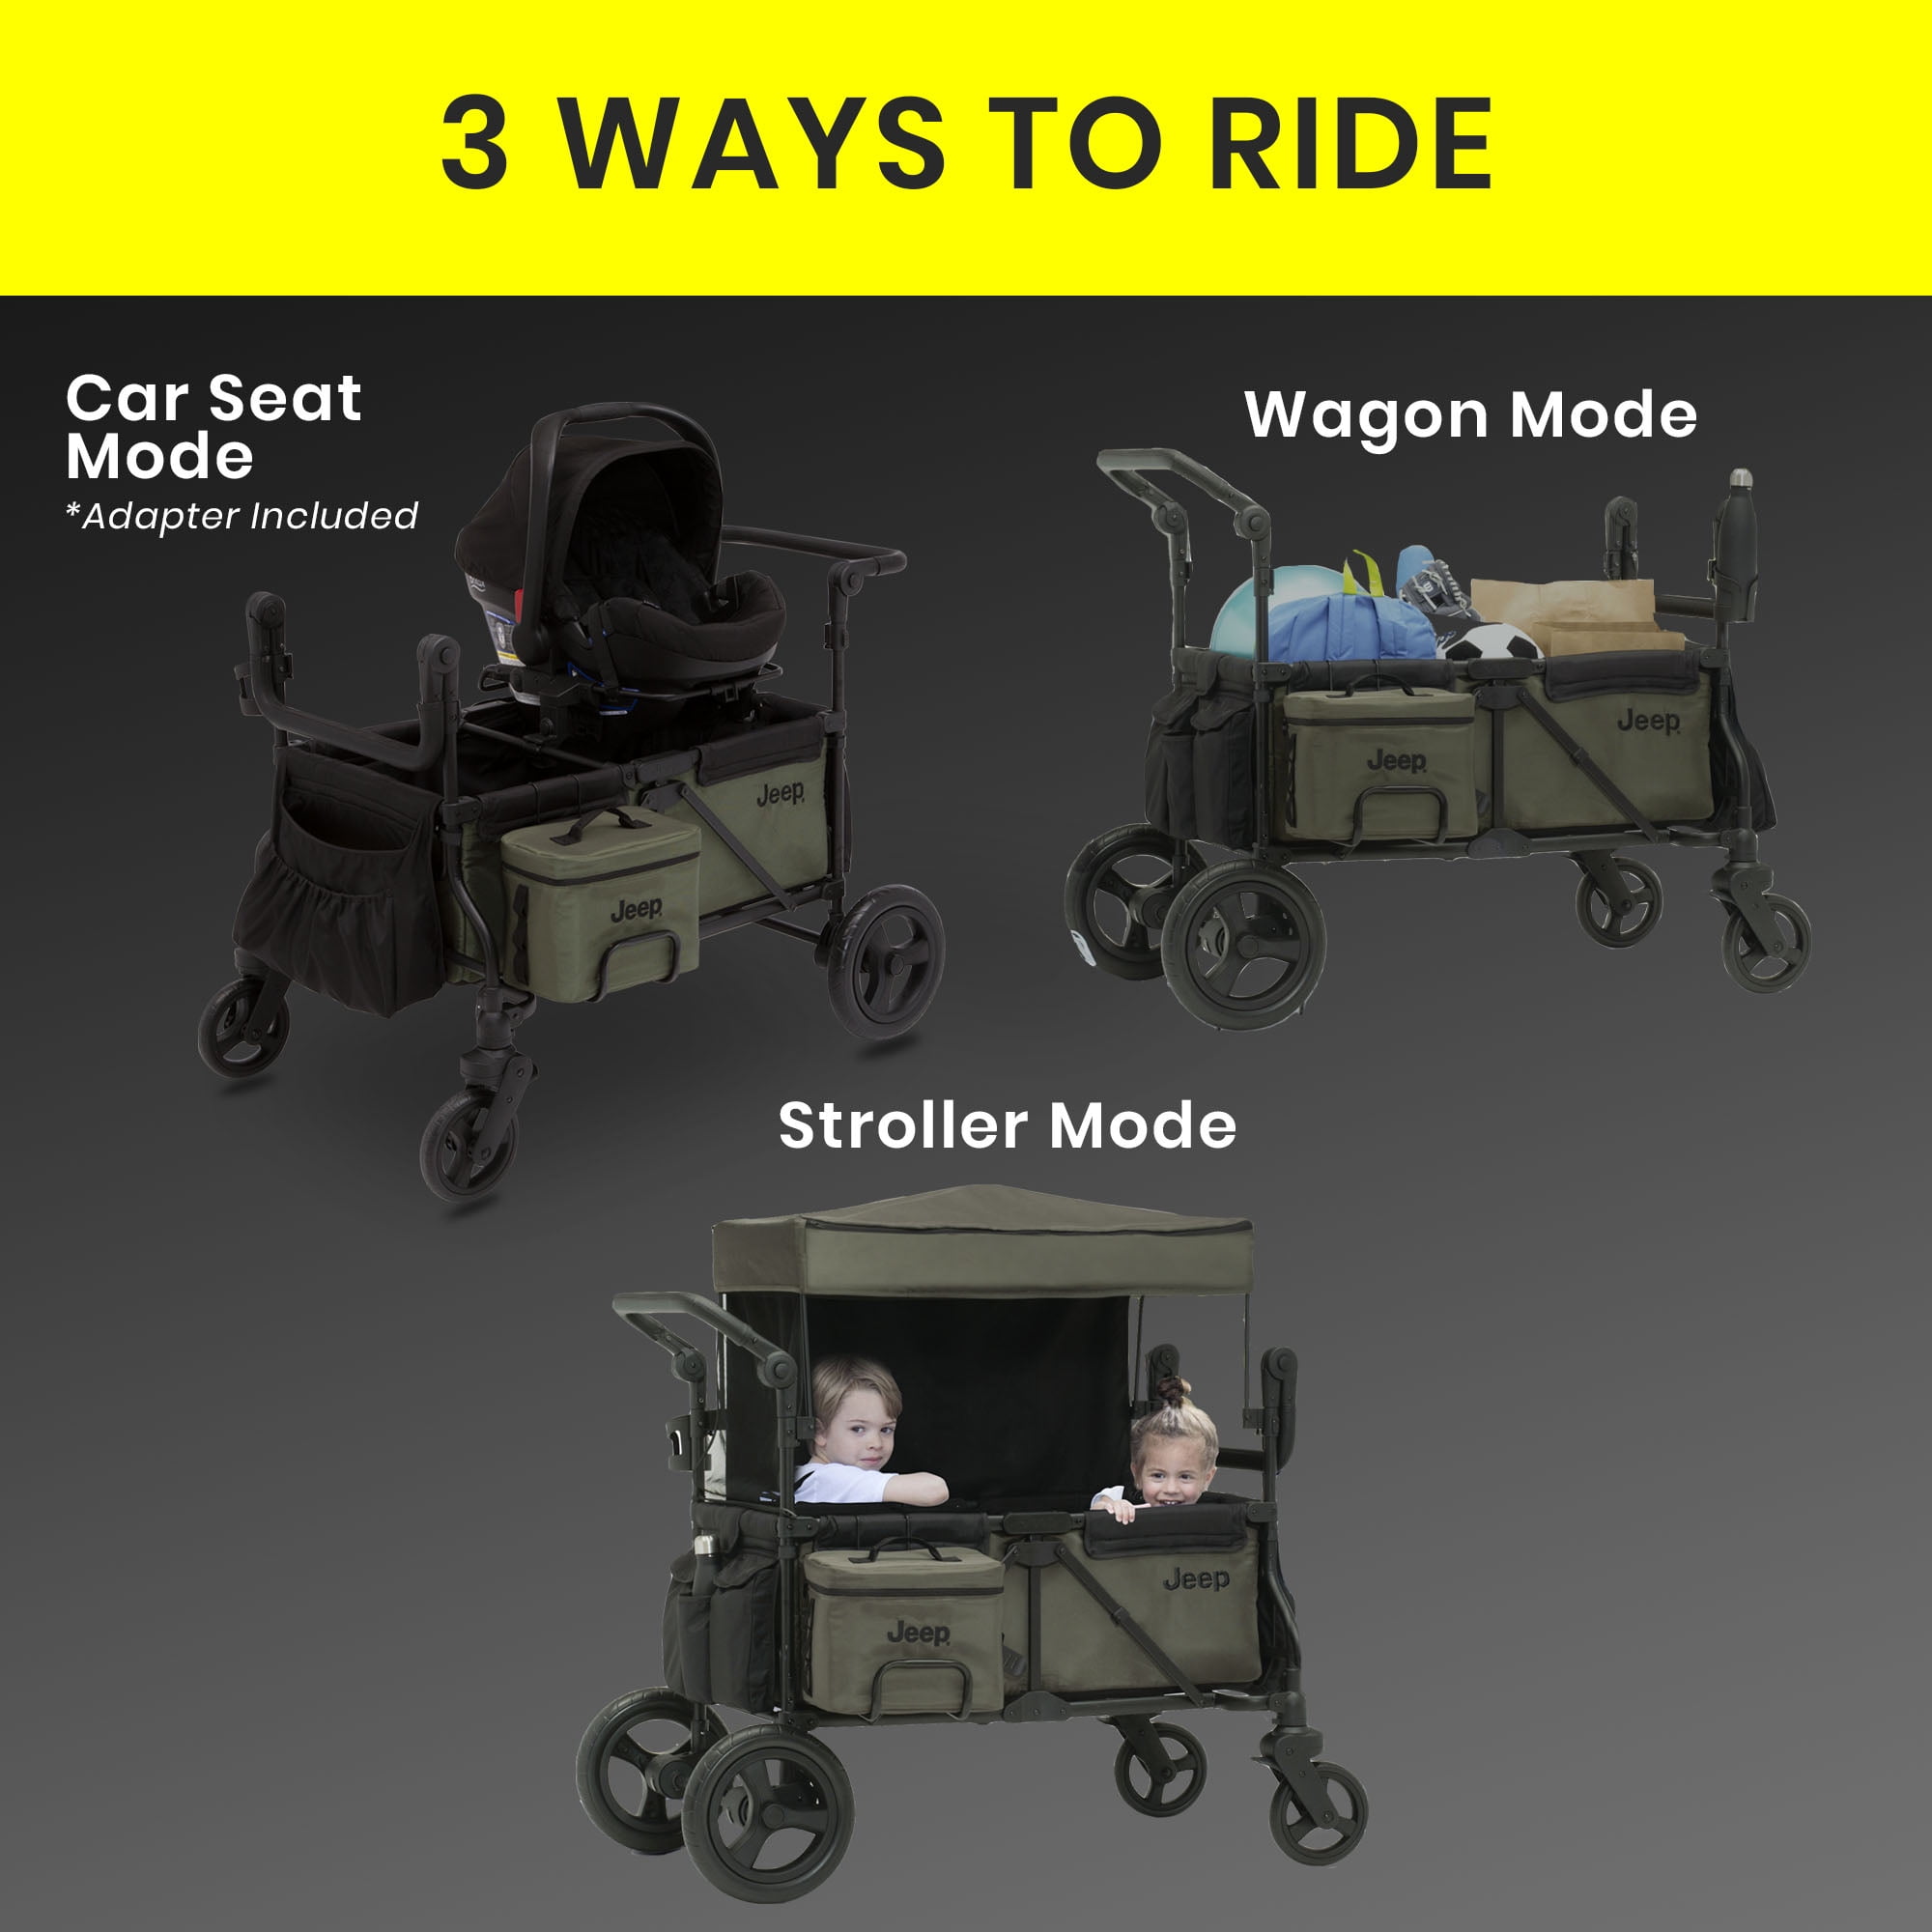 Jeep Deluxe Wrangler Wagon Stroller with Cooler Bag and Parent Organizer by  Delta Children 